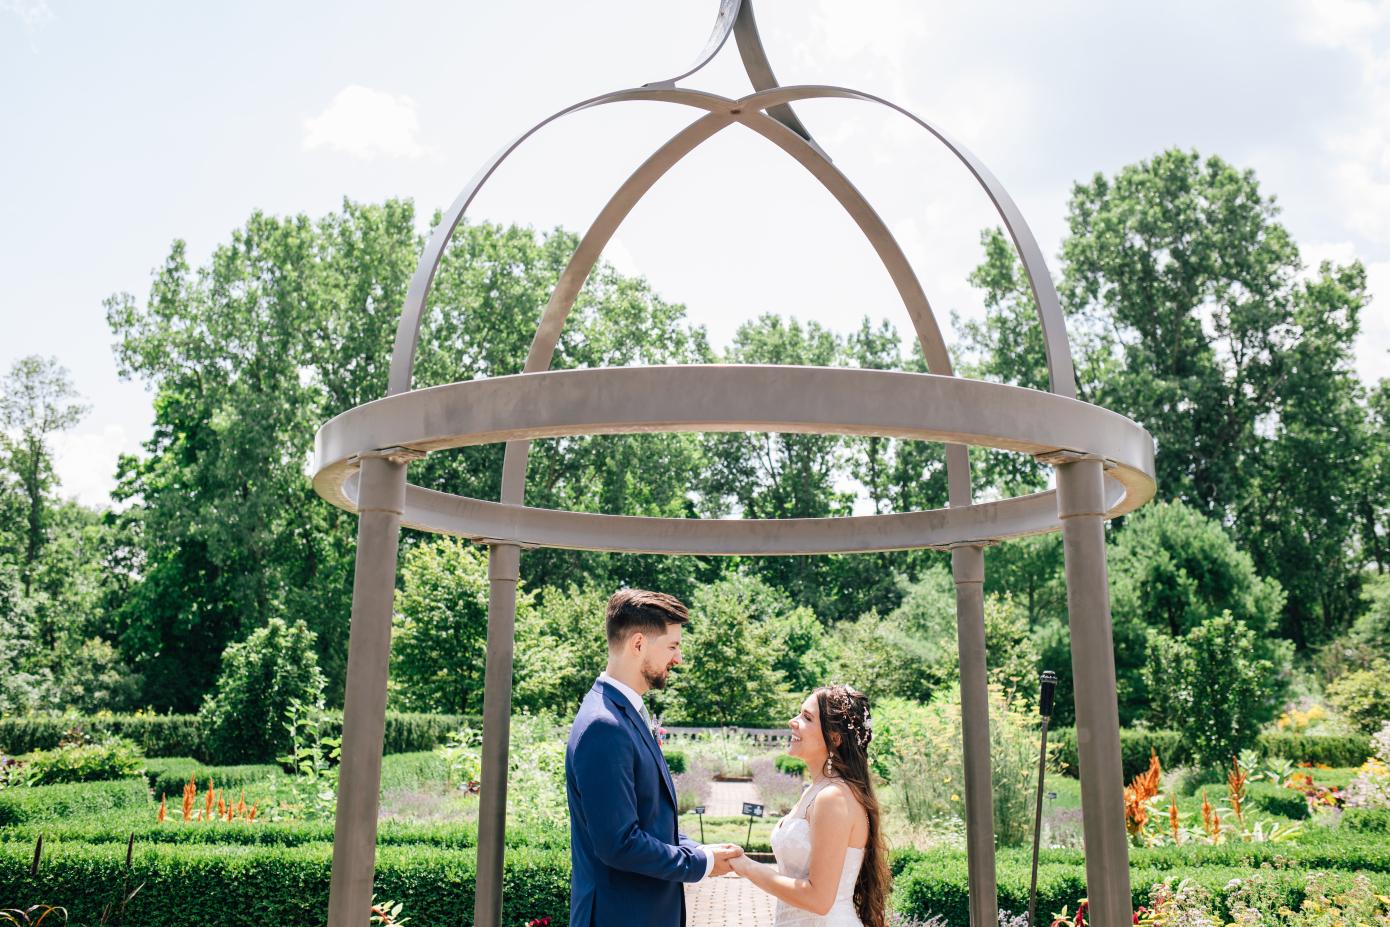 A couple exchanging vows in a wedding ceremony at the herb knot garden